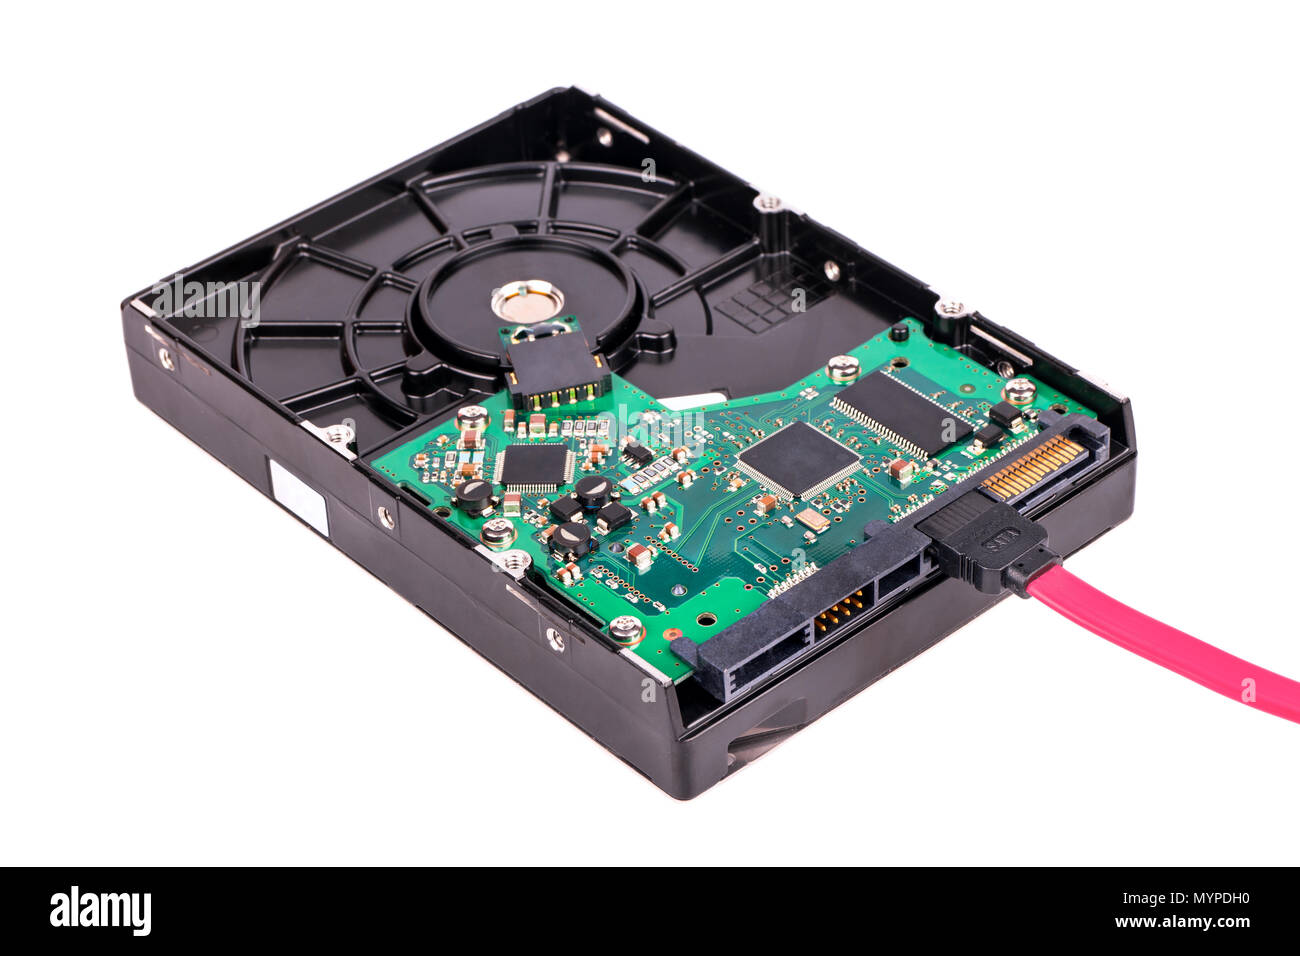 Hard disk drive (HDD) connected to the sata cable on a white background  Stock Photo - Alamy